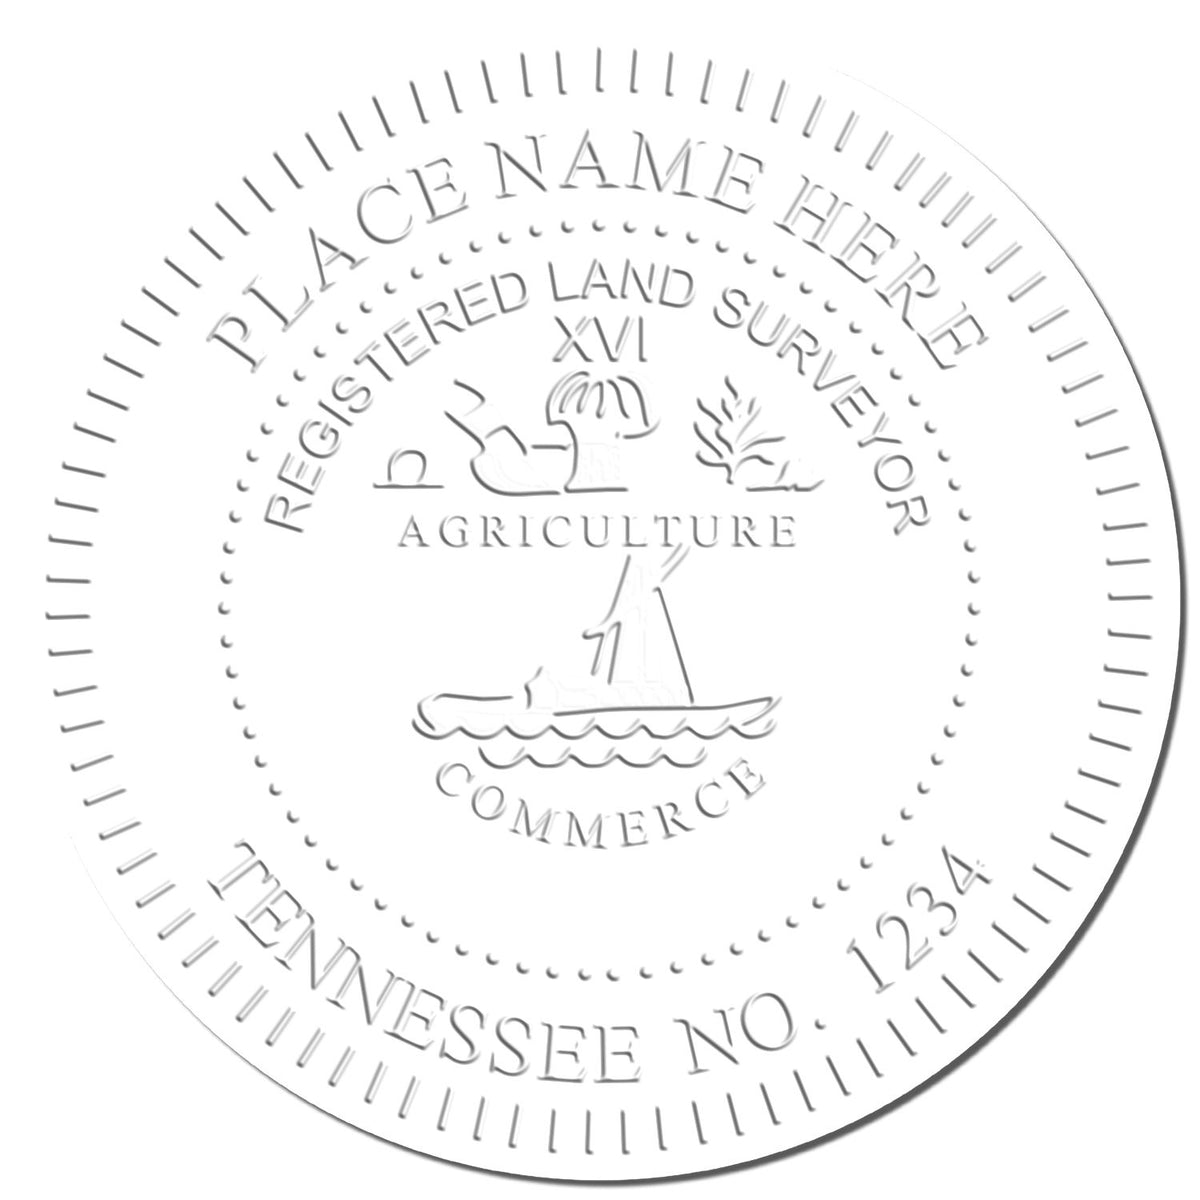 This paper is stamped with a sample imprint of the Hybrid Tennessee Land Surveyor Seal, signifying its quality and reliability.